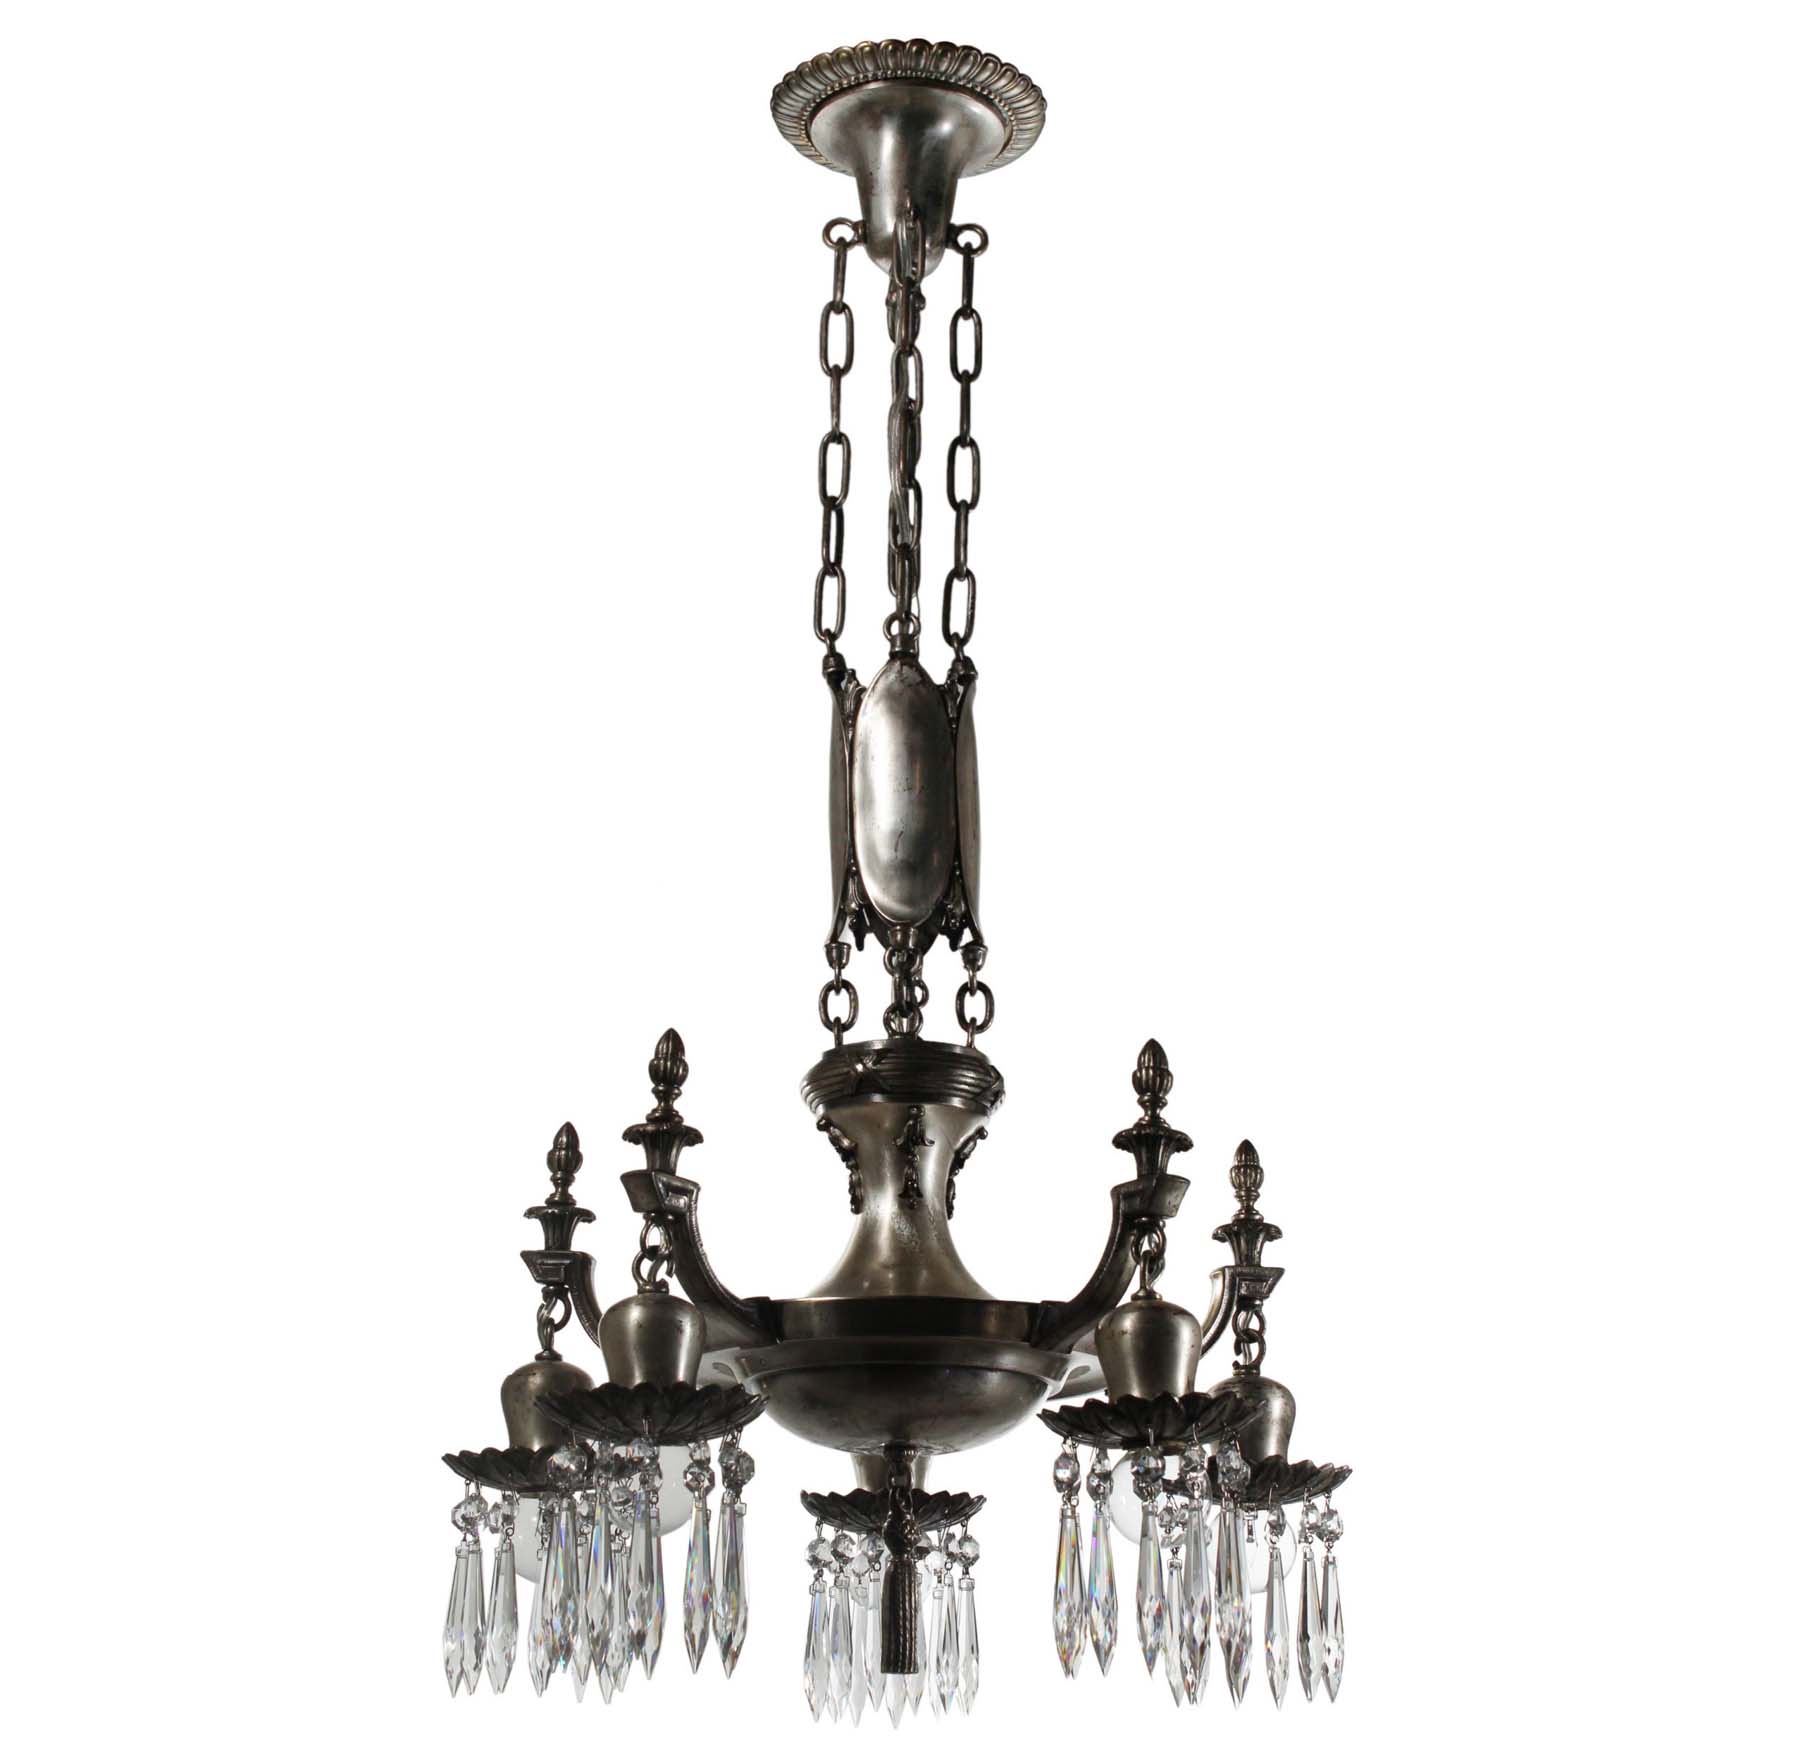 SOLD Antique Neoclassical Silver Plated Chandelier with Prisms-68305